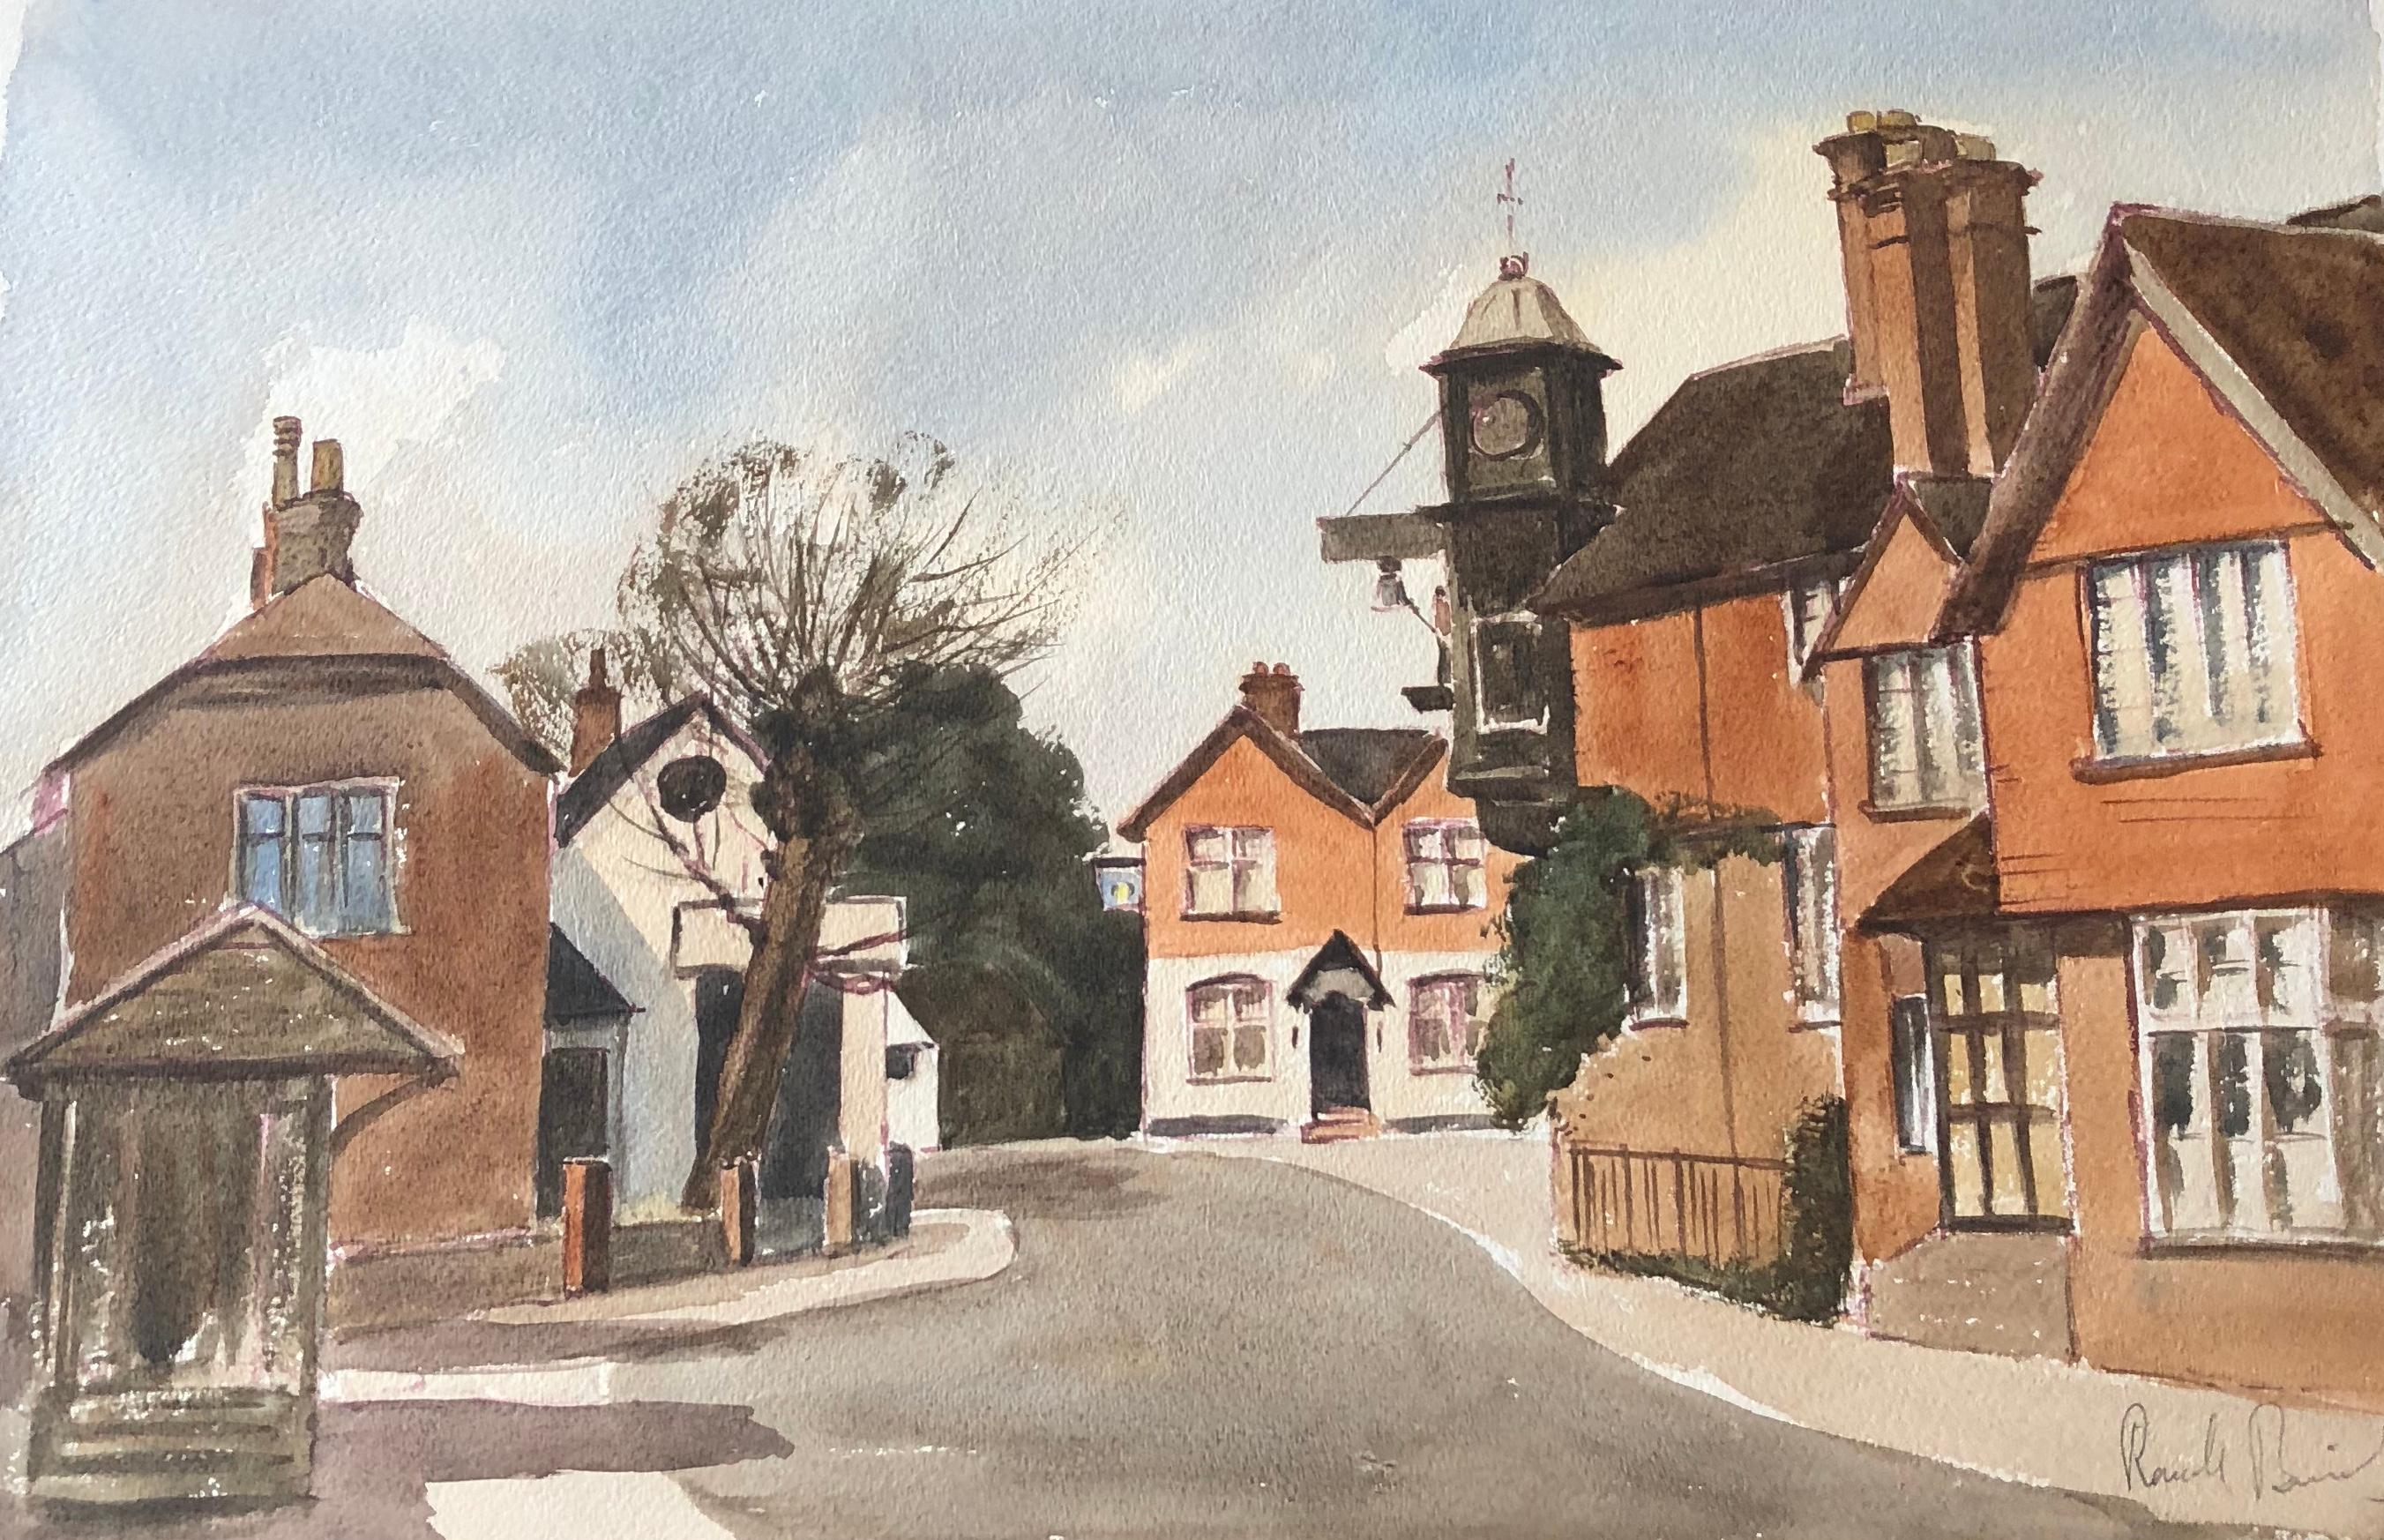 Ronald Birch Landscape Painting - The Clock Tower, English Town, signed original British watercolour painting